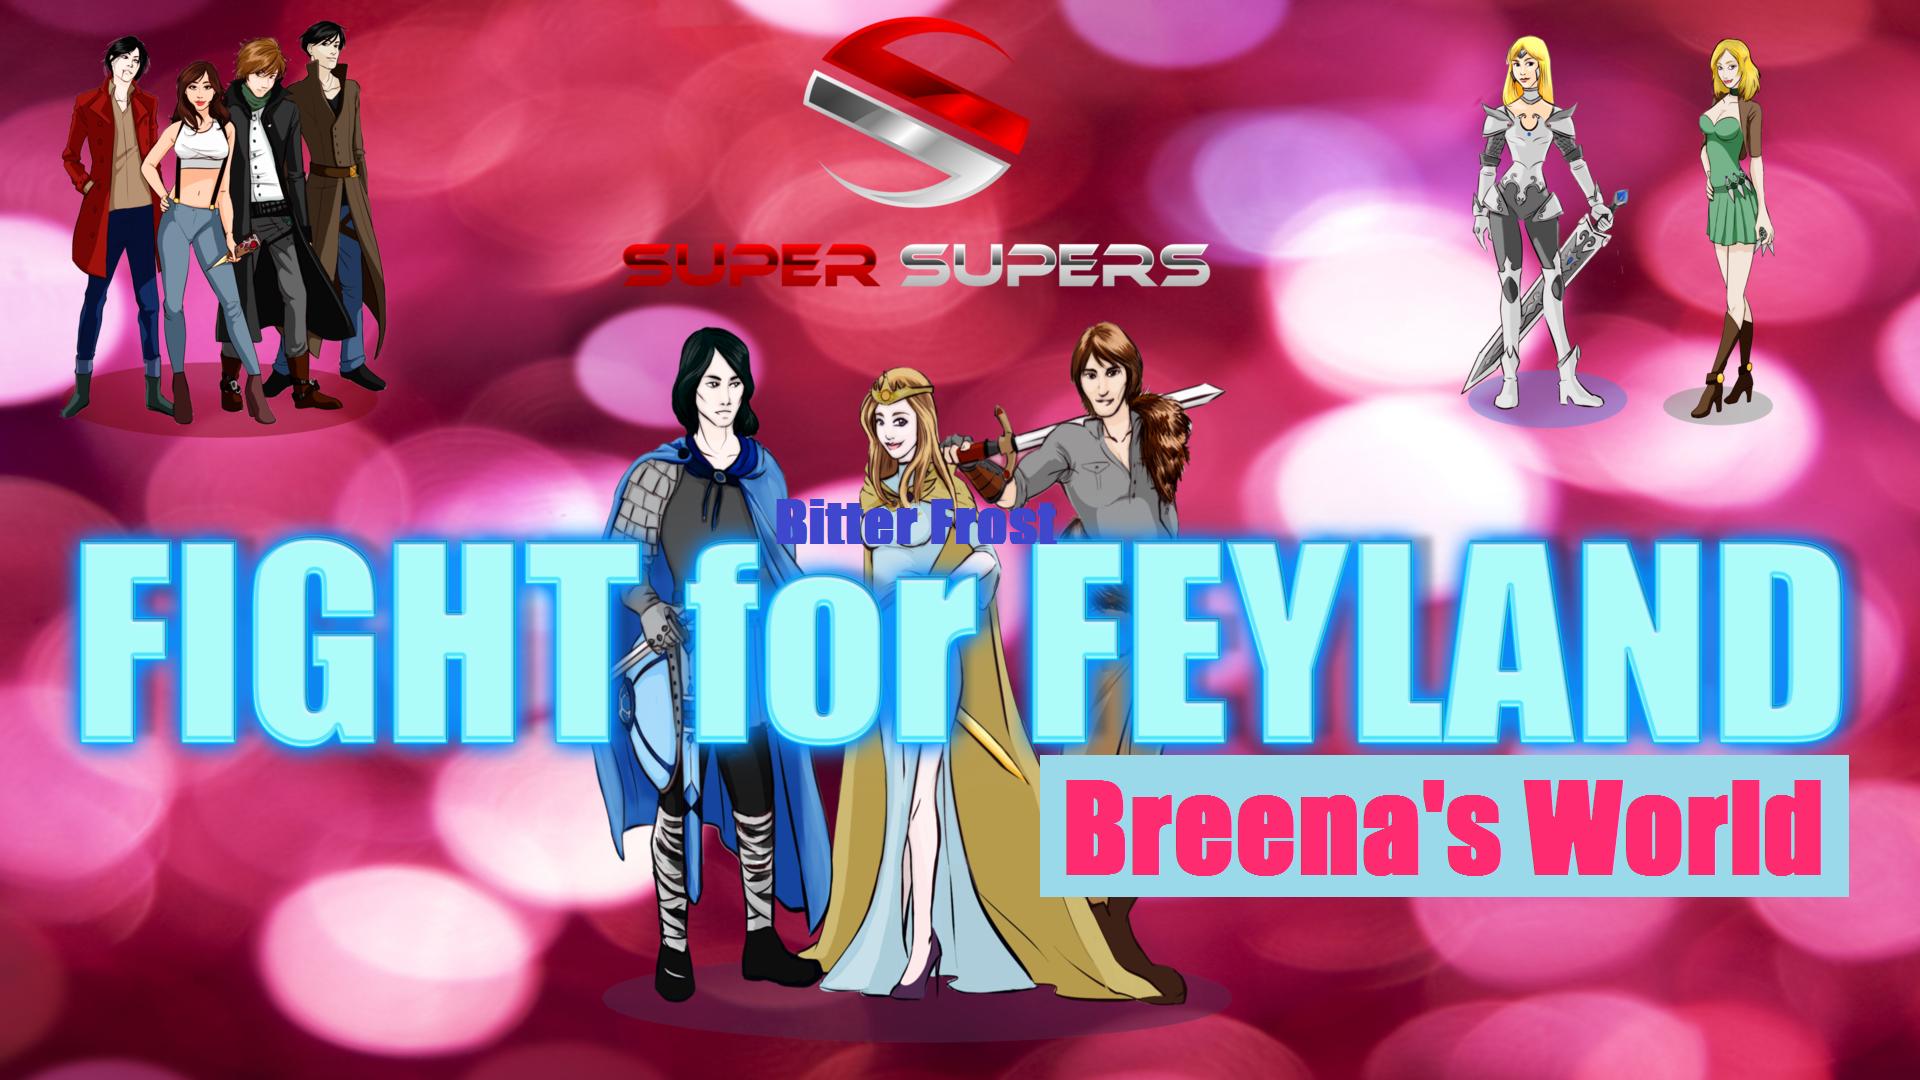 Super Supers: Bitter Frost Fight for Feyland - Breena's World